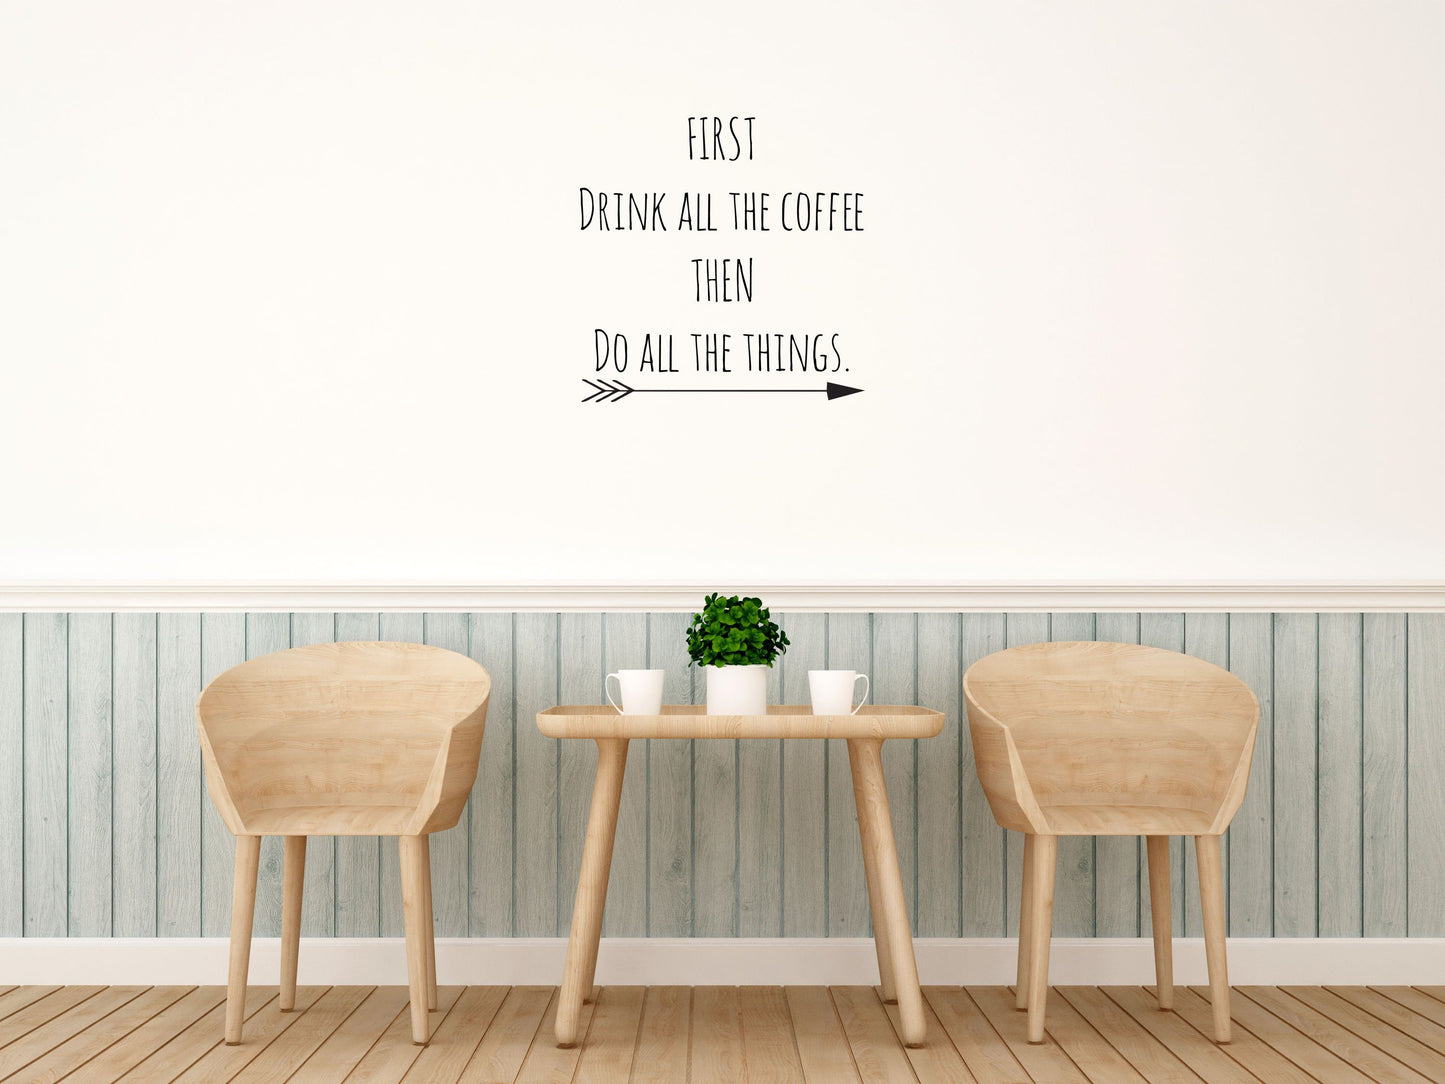 First Drink All The Coffee Then Do All The Things - Inspirational Wall Decals Vinyl Wall Decal Inspirational Wall Signs 